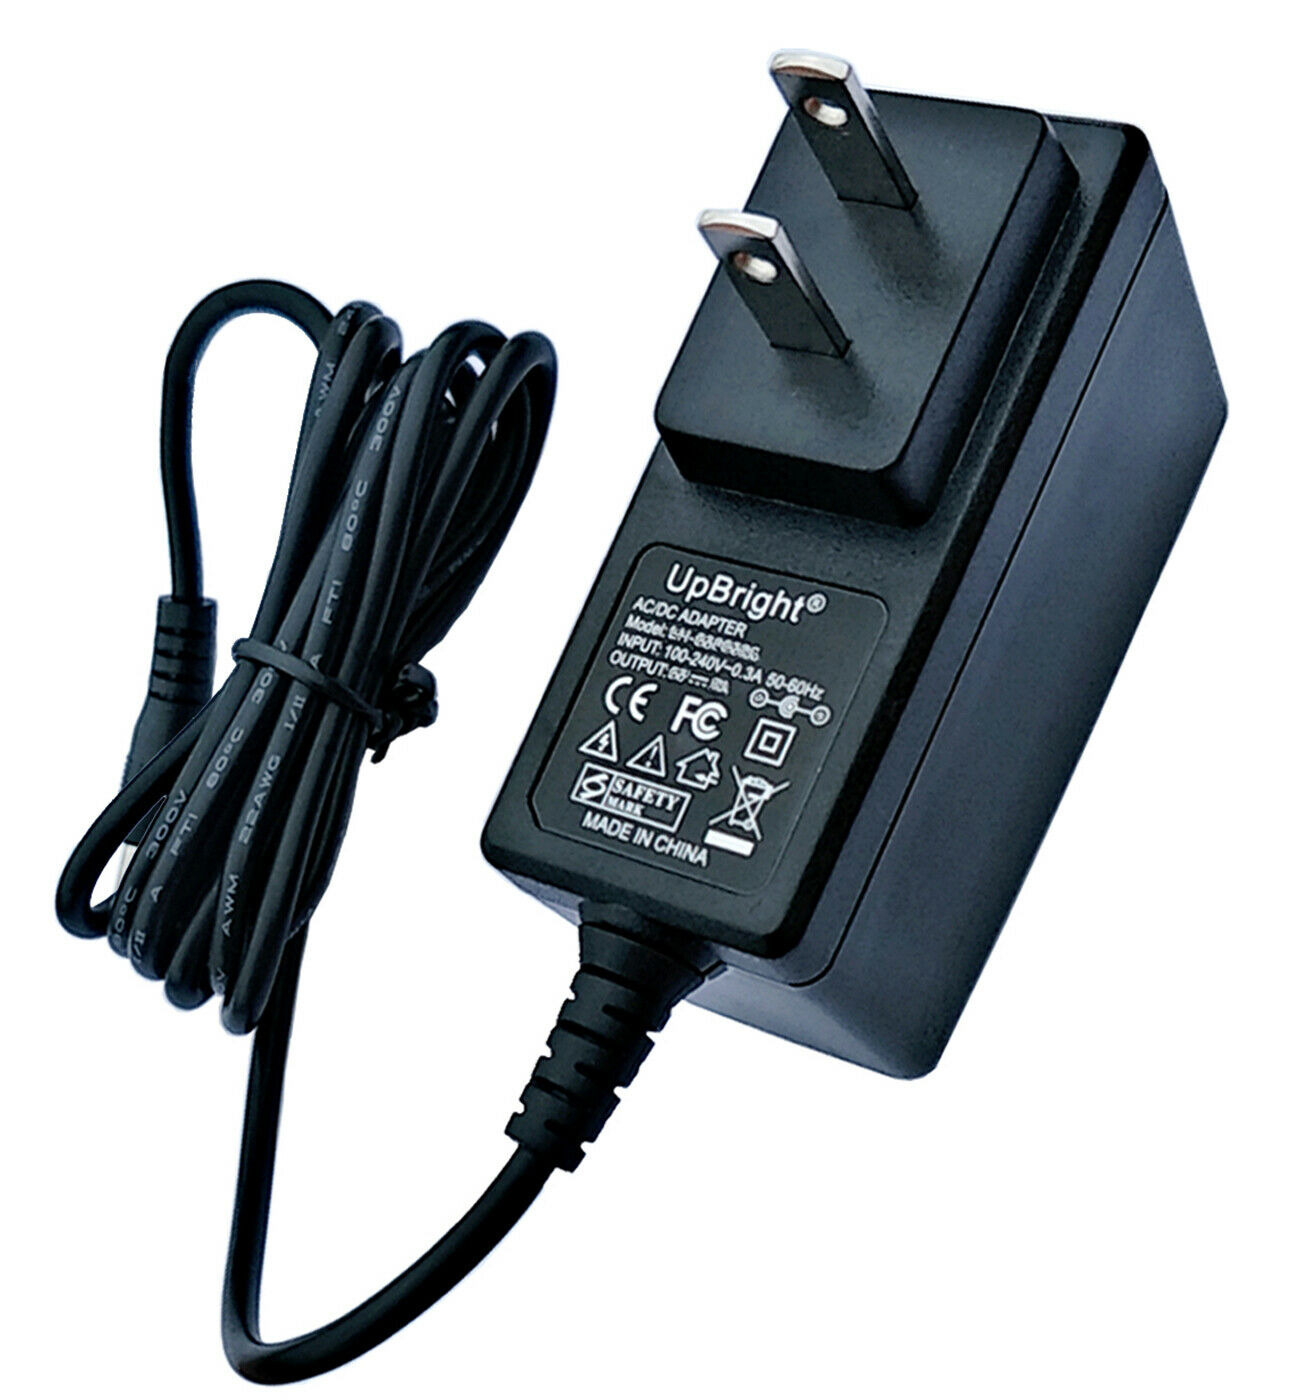 AC Adapter For Harley Davidson Neon Clock HDL-16611 HDL16611 Power supply Cord